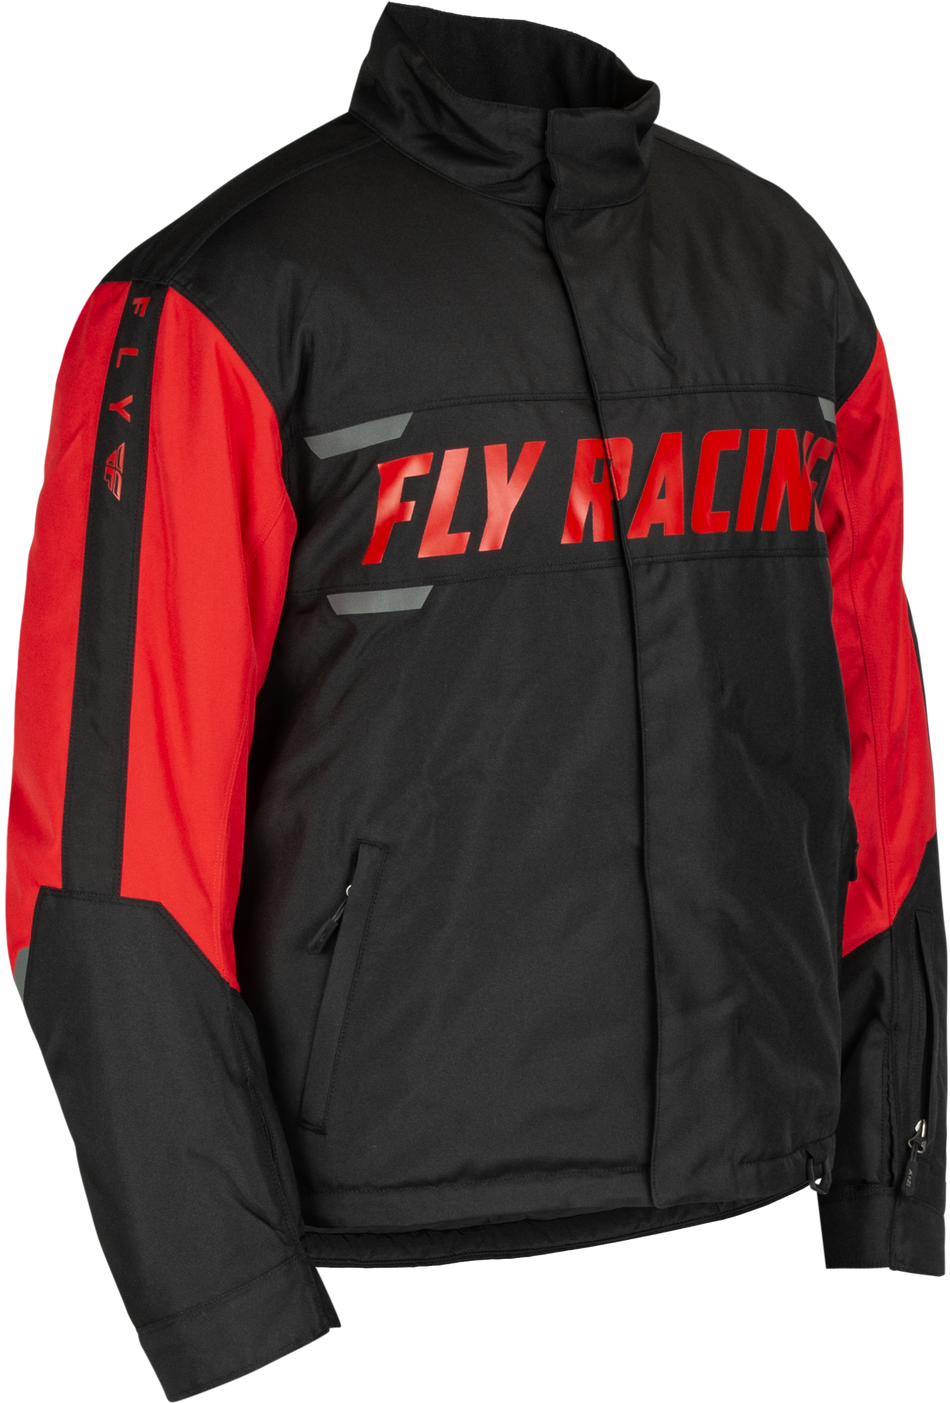 FLY RACING Outpost Jacket Black/Red Lg 470-5502L